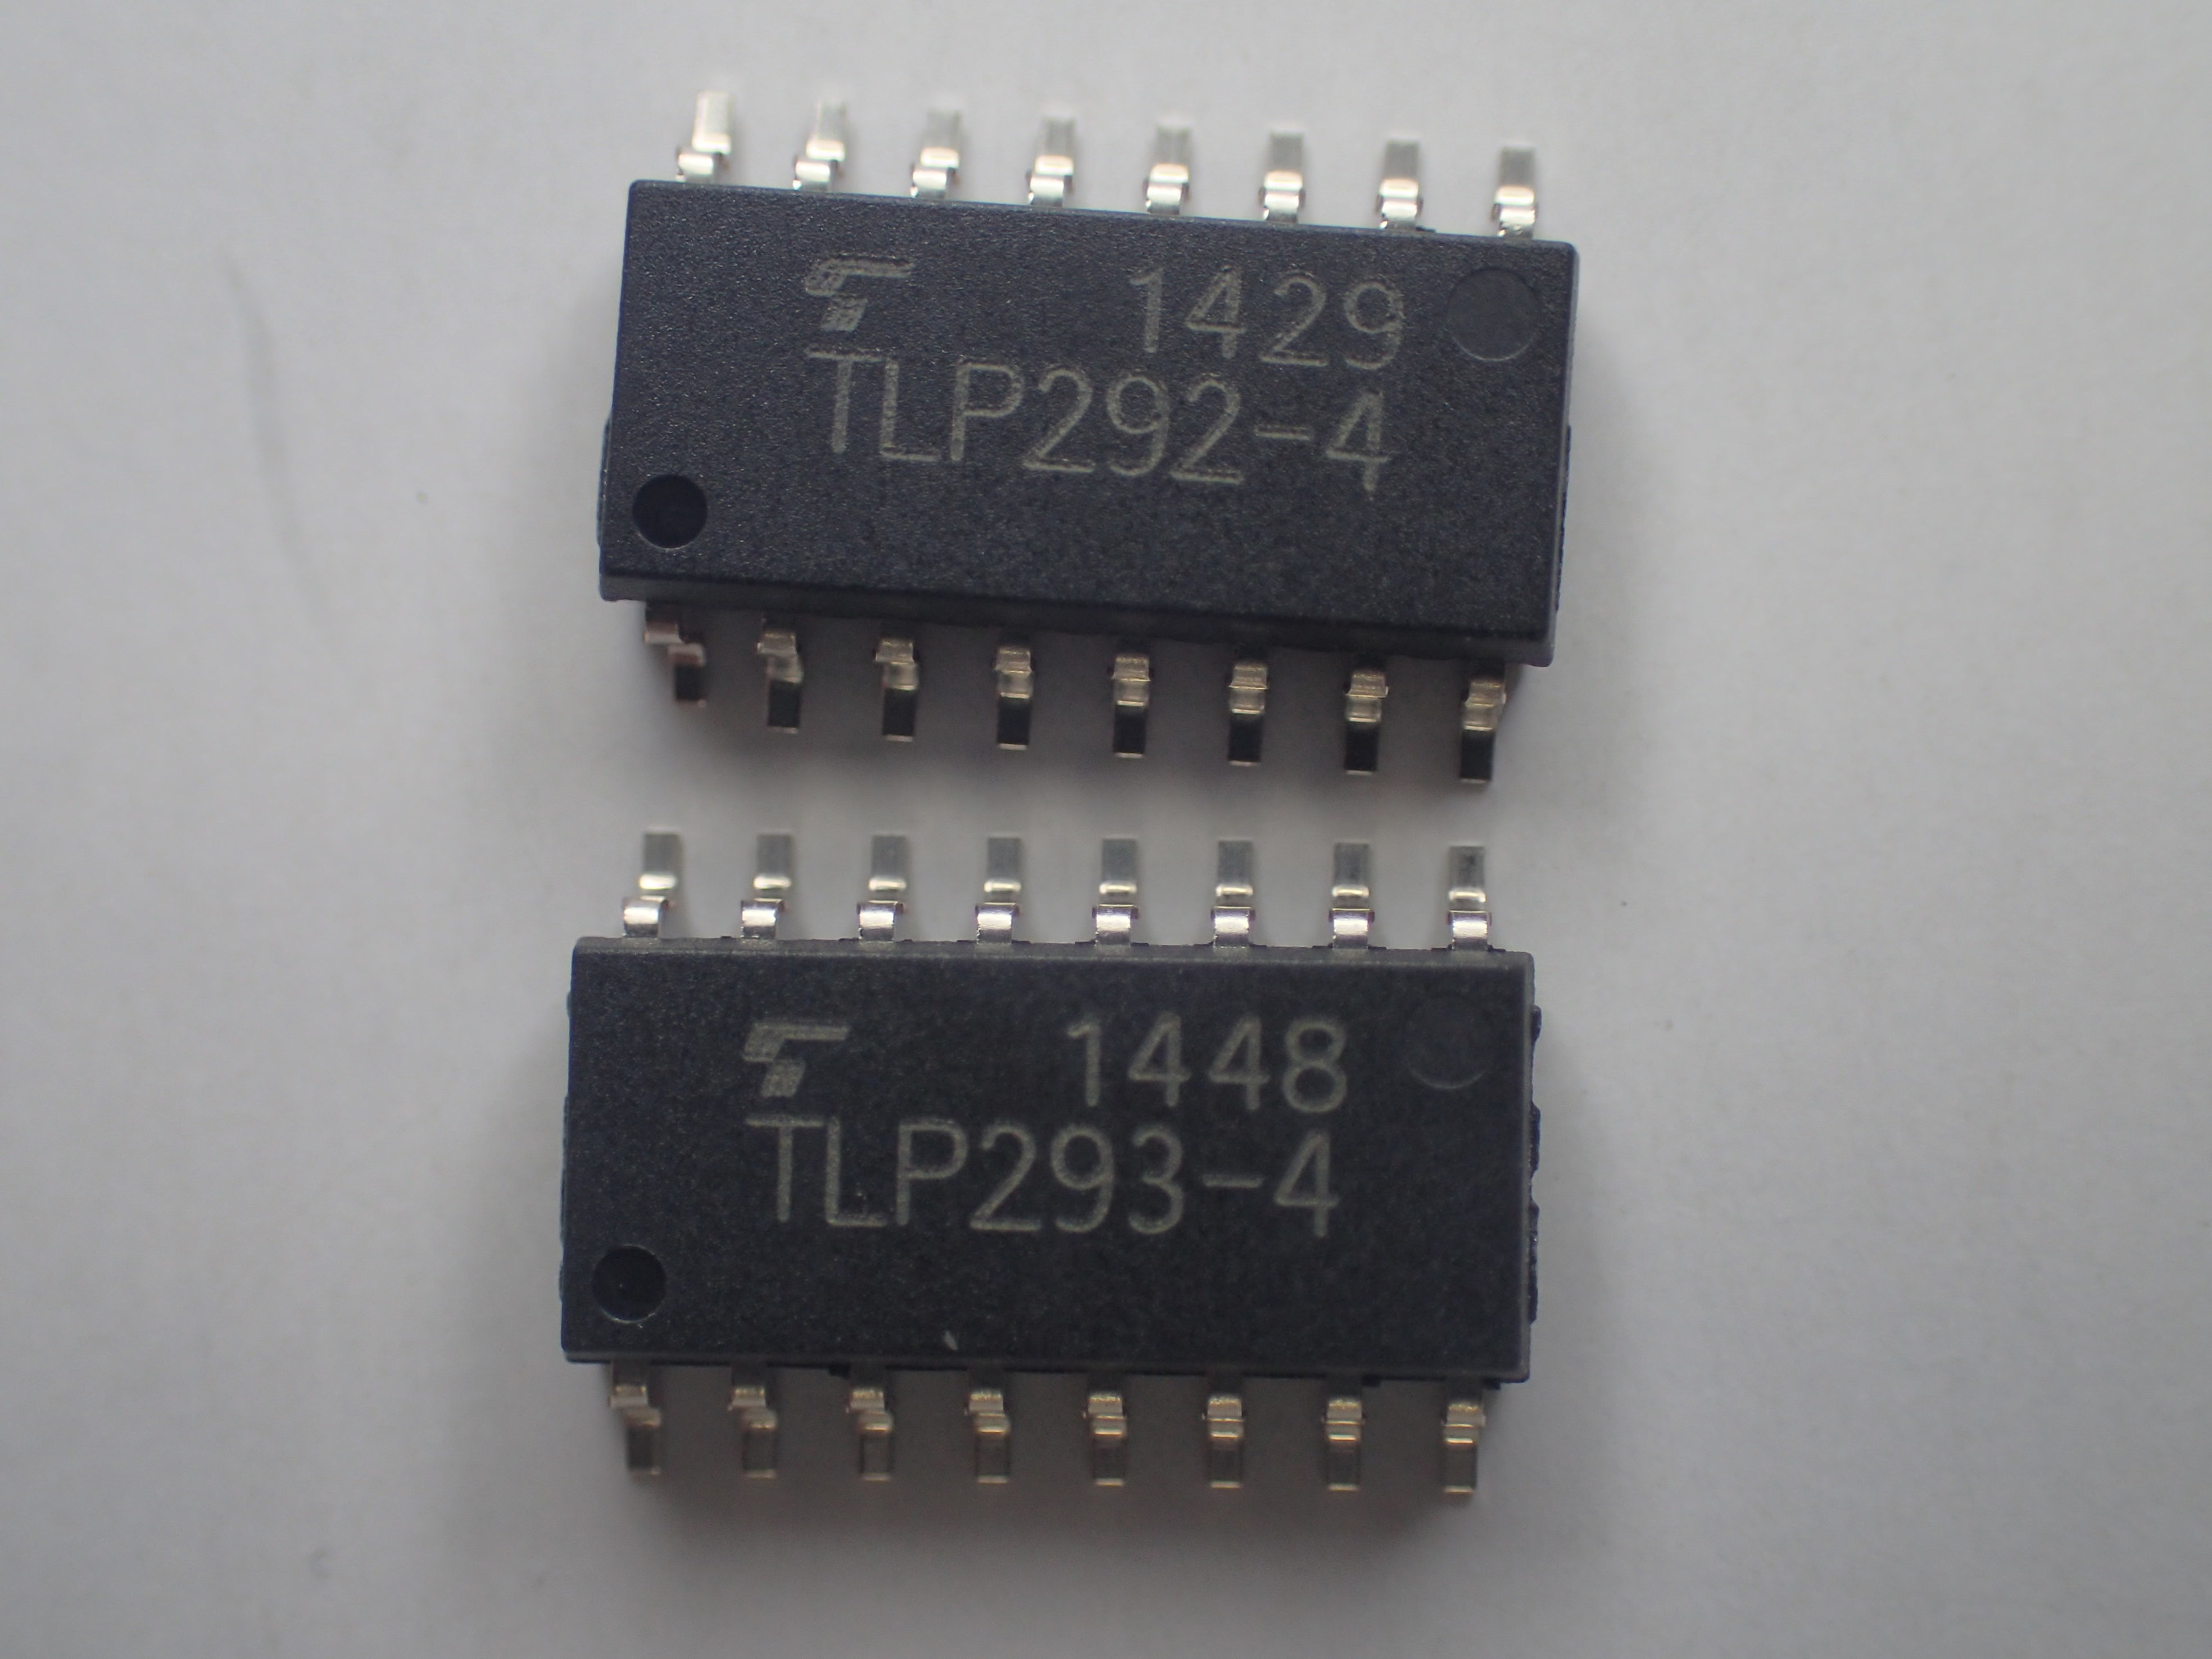 Toshiba's new TLP292-4 and TLP293-4 four-channel transistor photocouplers allow designers to meet the space saving requirements of increasingly smaller, thinner end products.